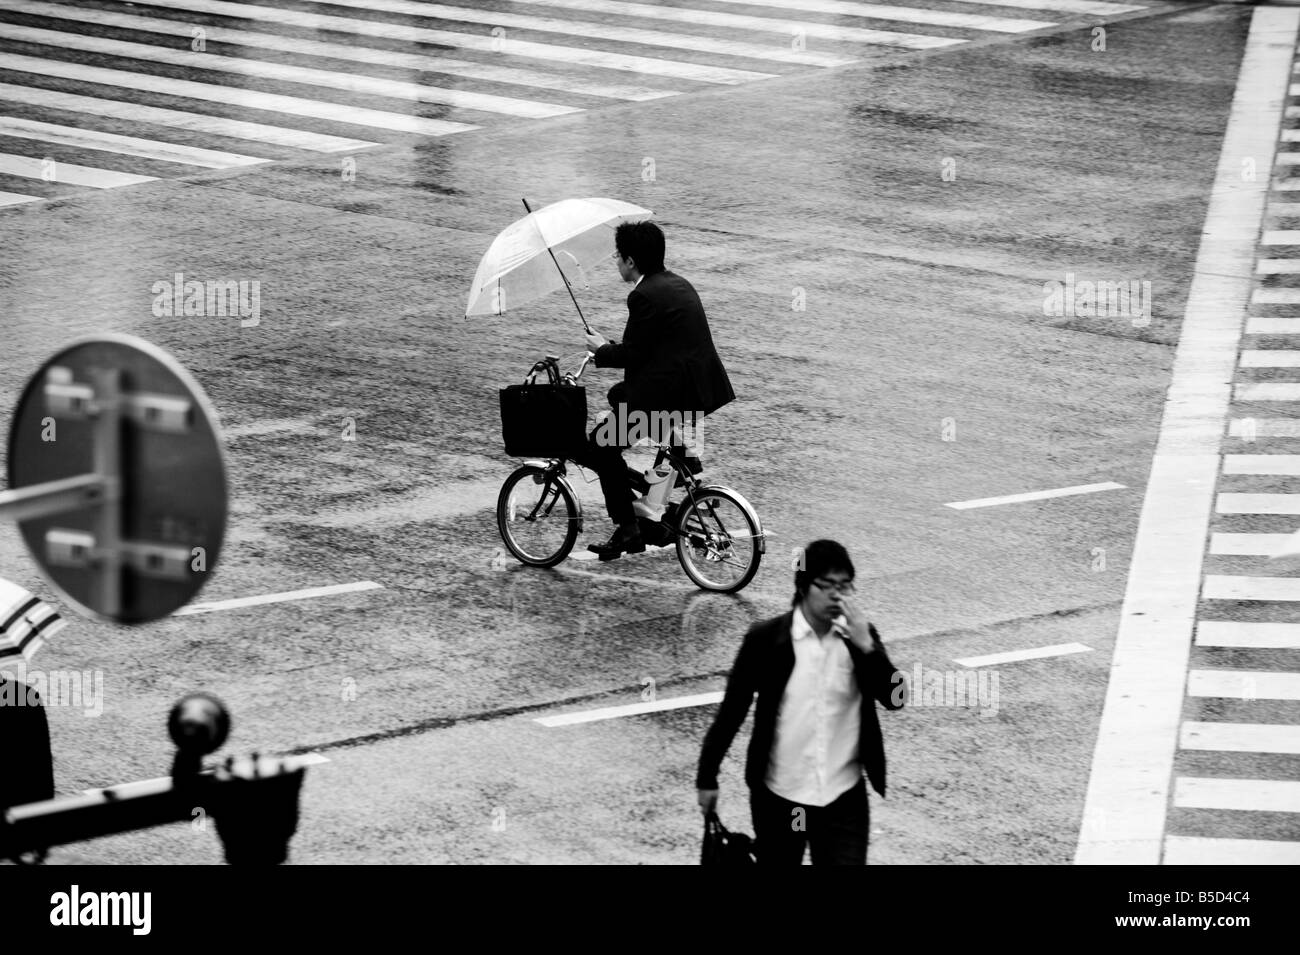 Man on bicycle with umbrella at the main crossing in The Shibuya district of Tokyo, Japan. Stock Photo